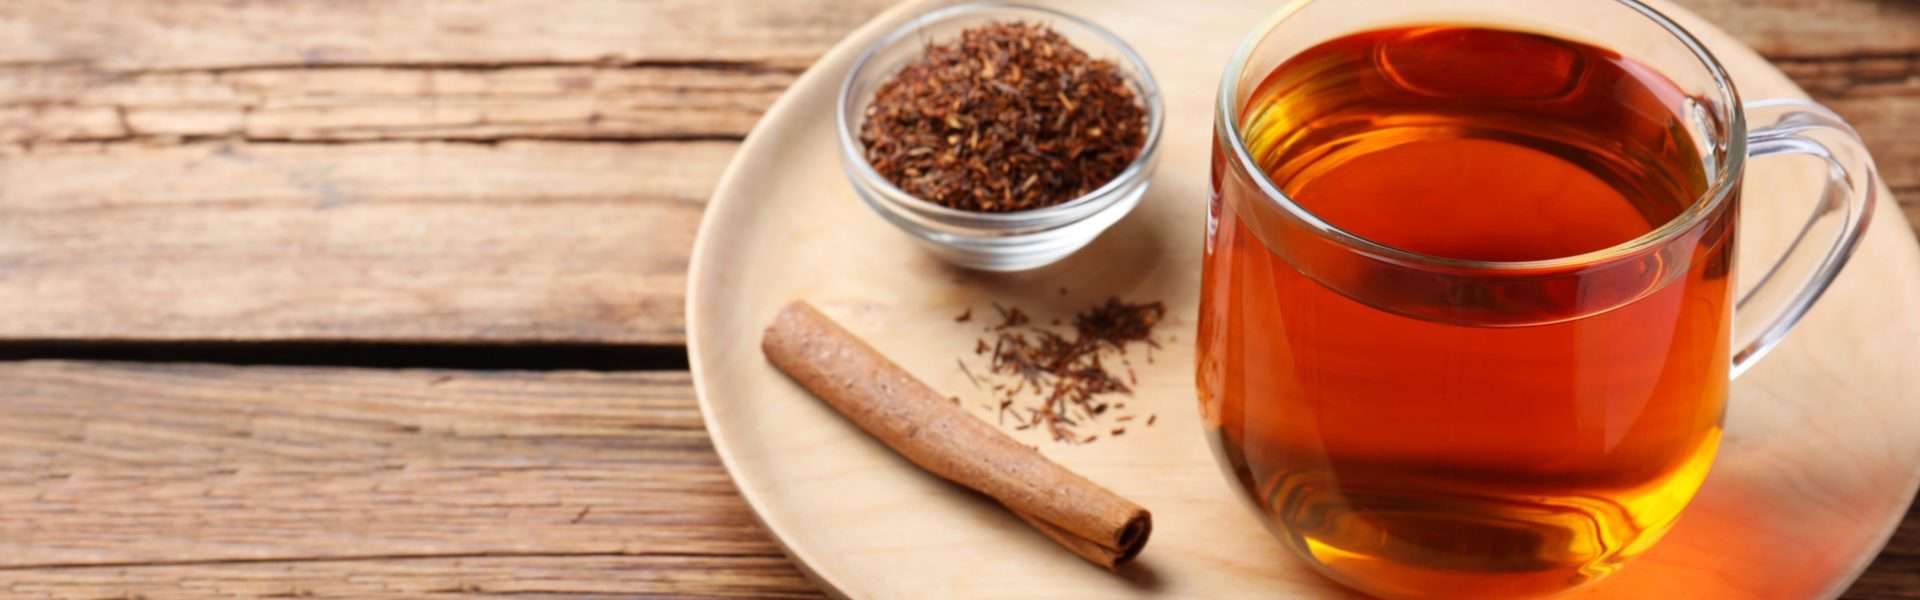 Thé rooibos I Afrique I ROOIBOS VERT